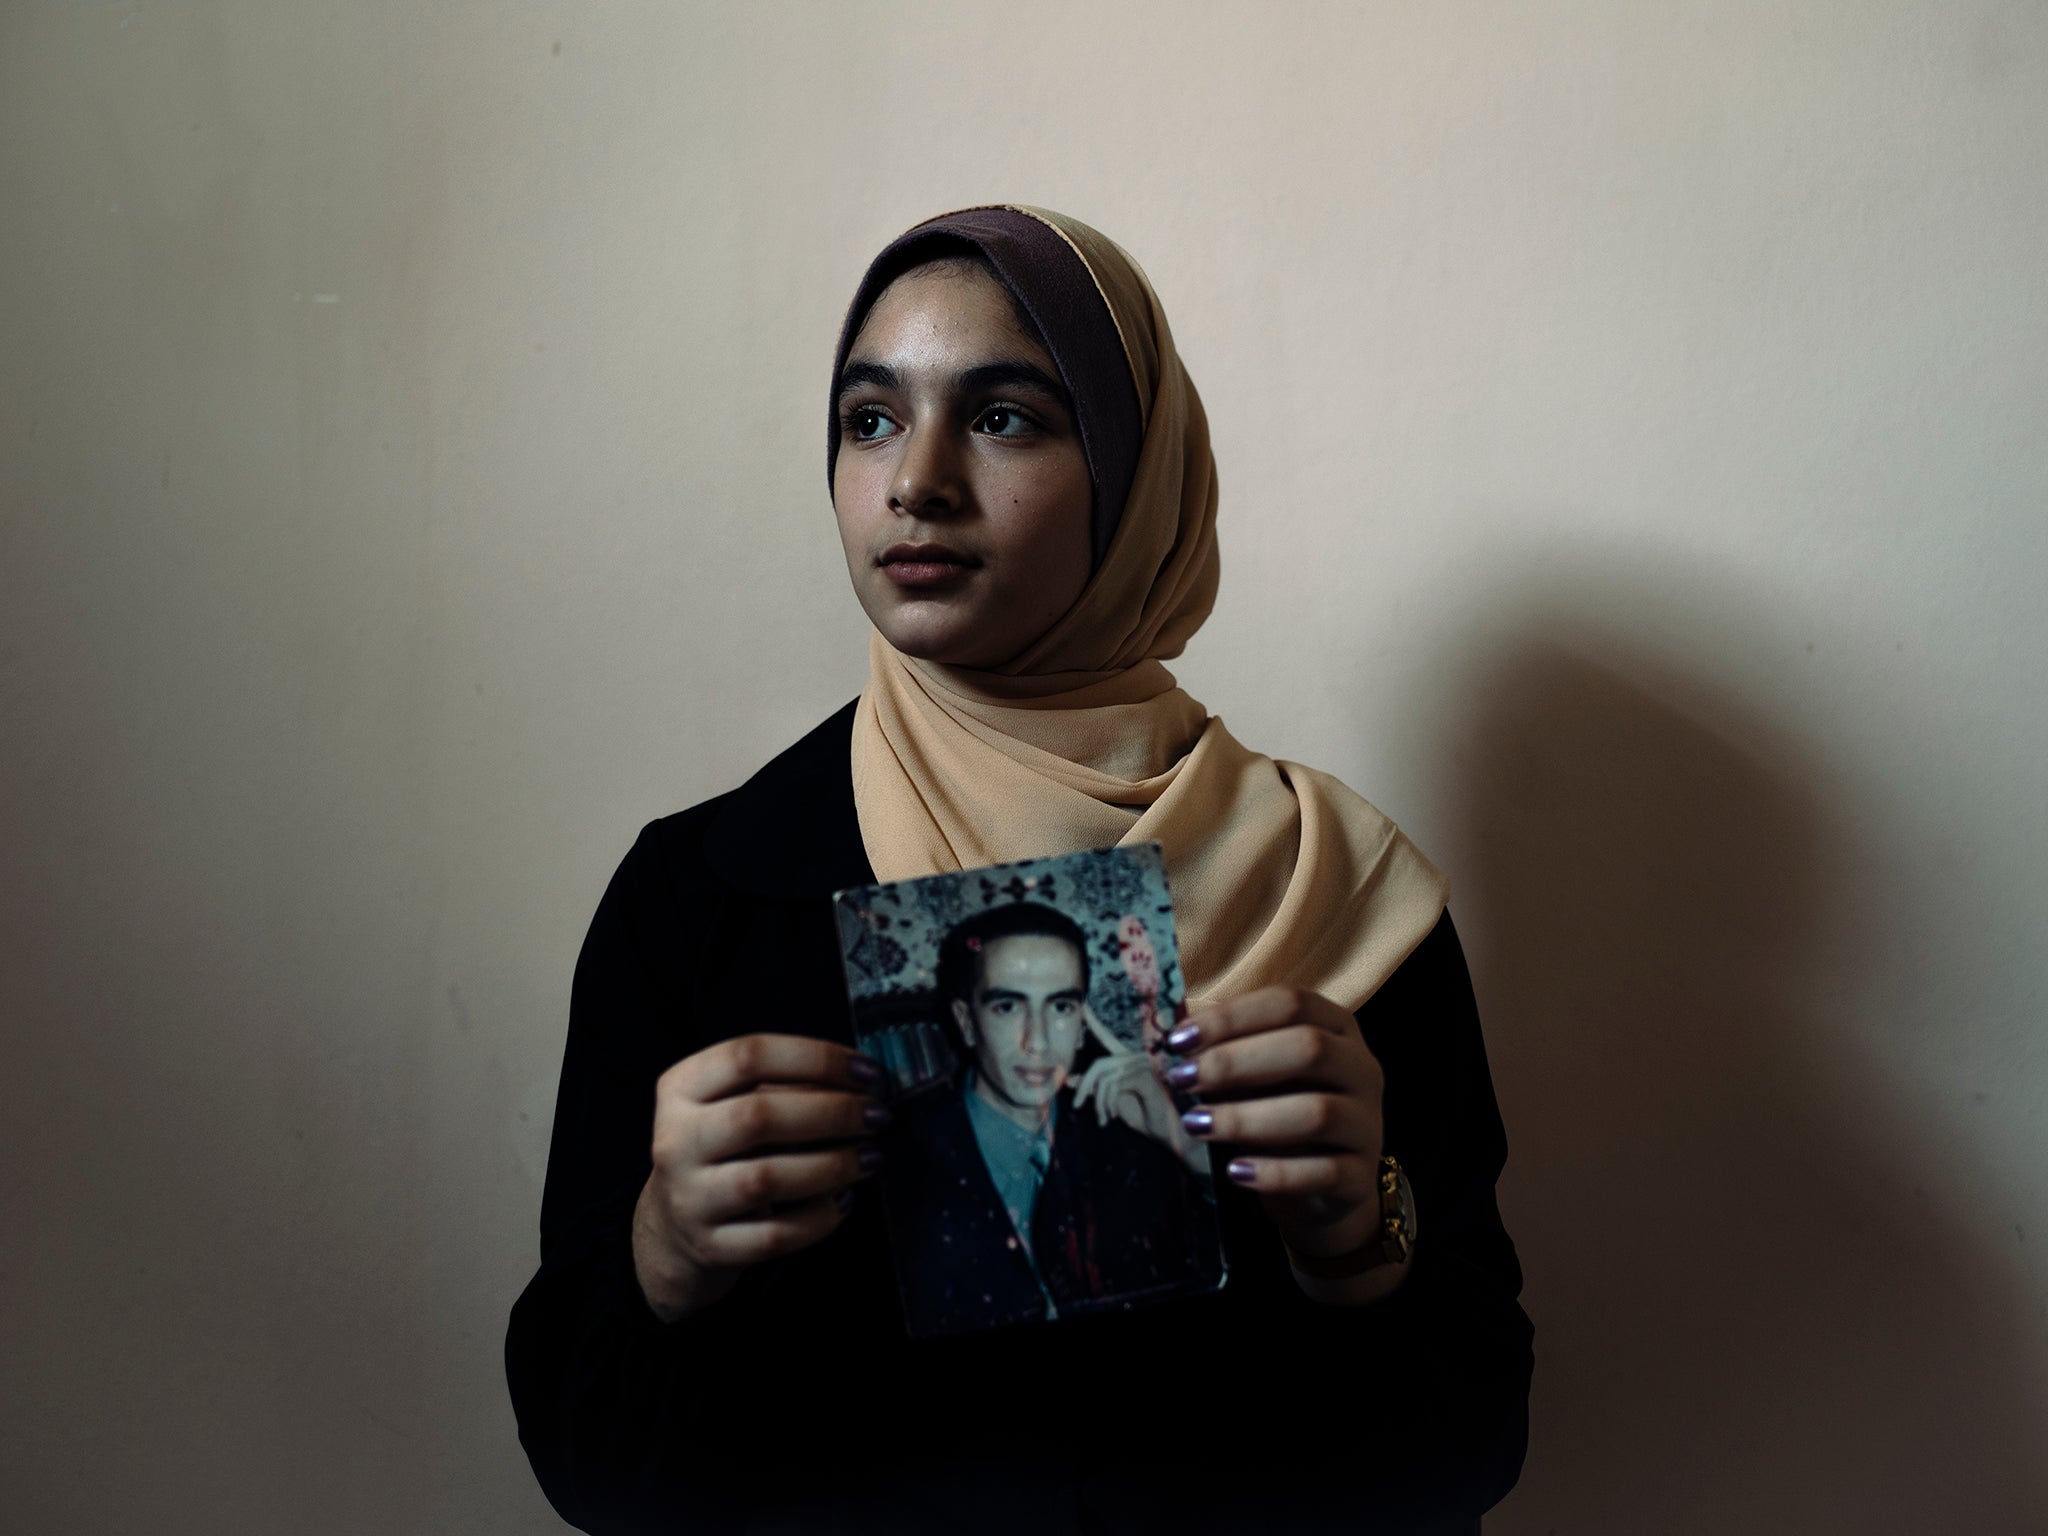 Dina, 15, struggled at school in the wake of her father’s death, but the Wajd programme for fatherless and orphaned in Gaza assisted in providing extra lessons